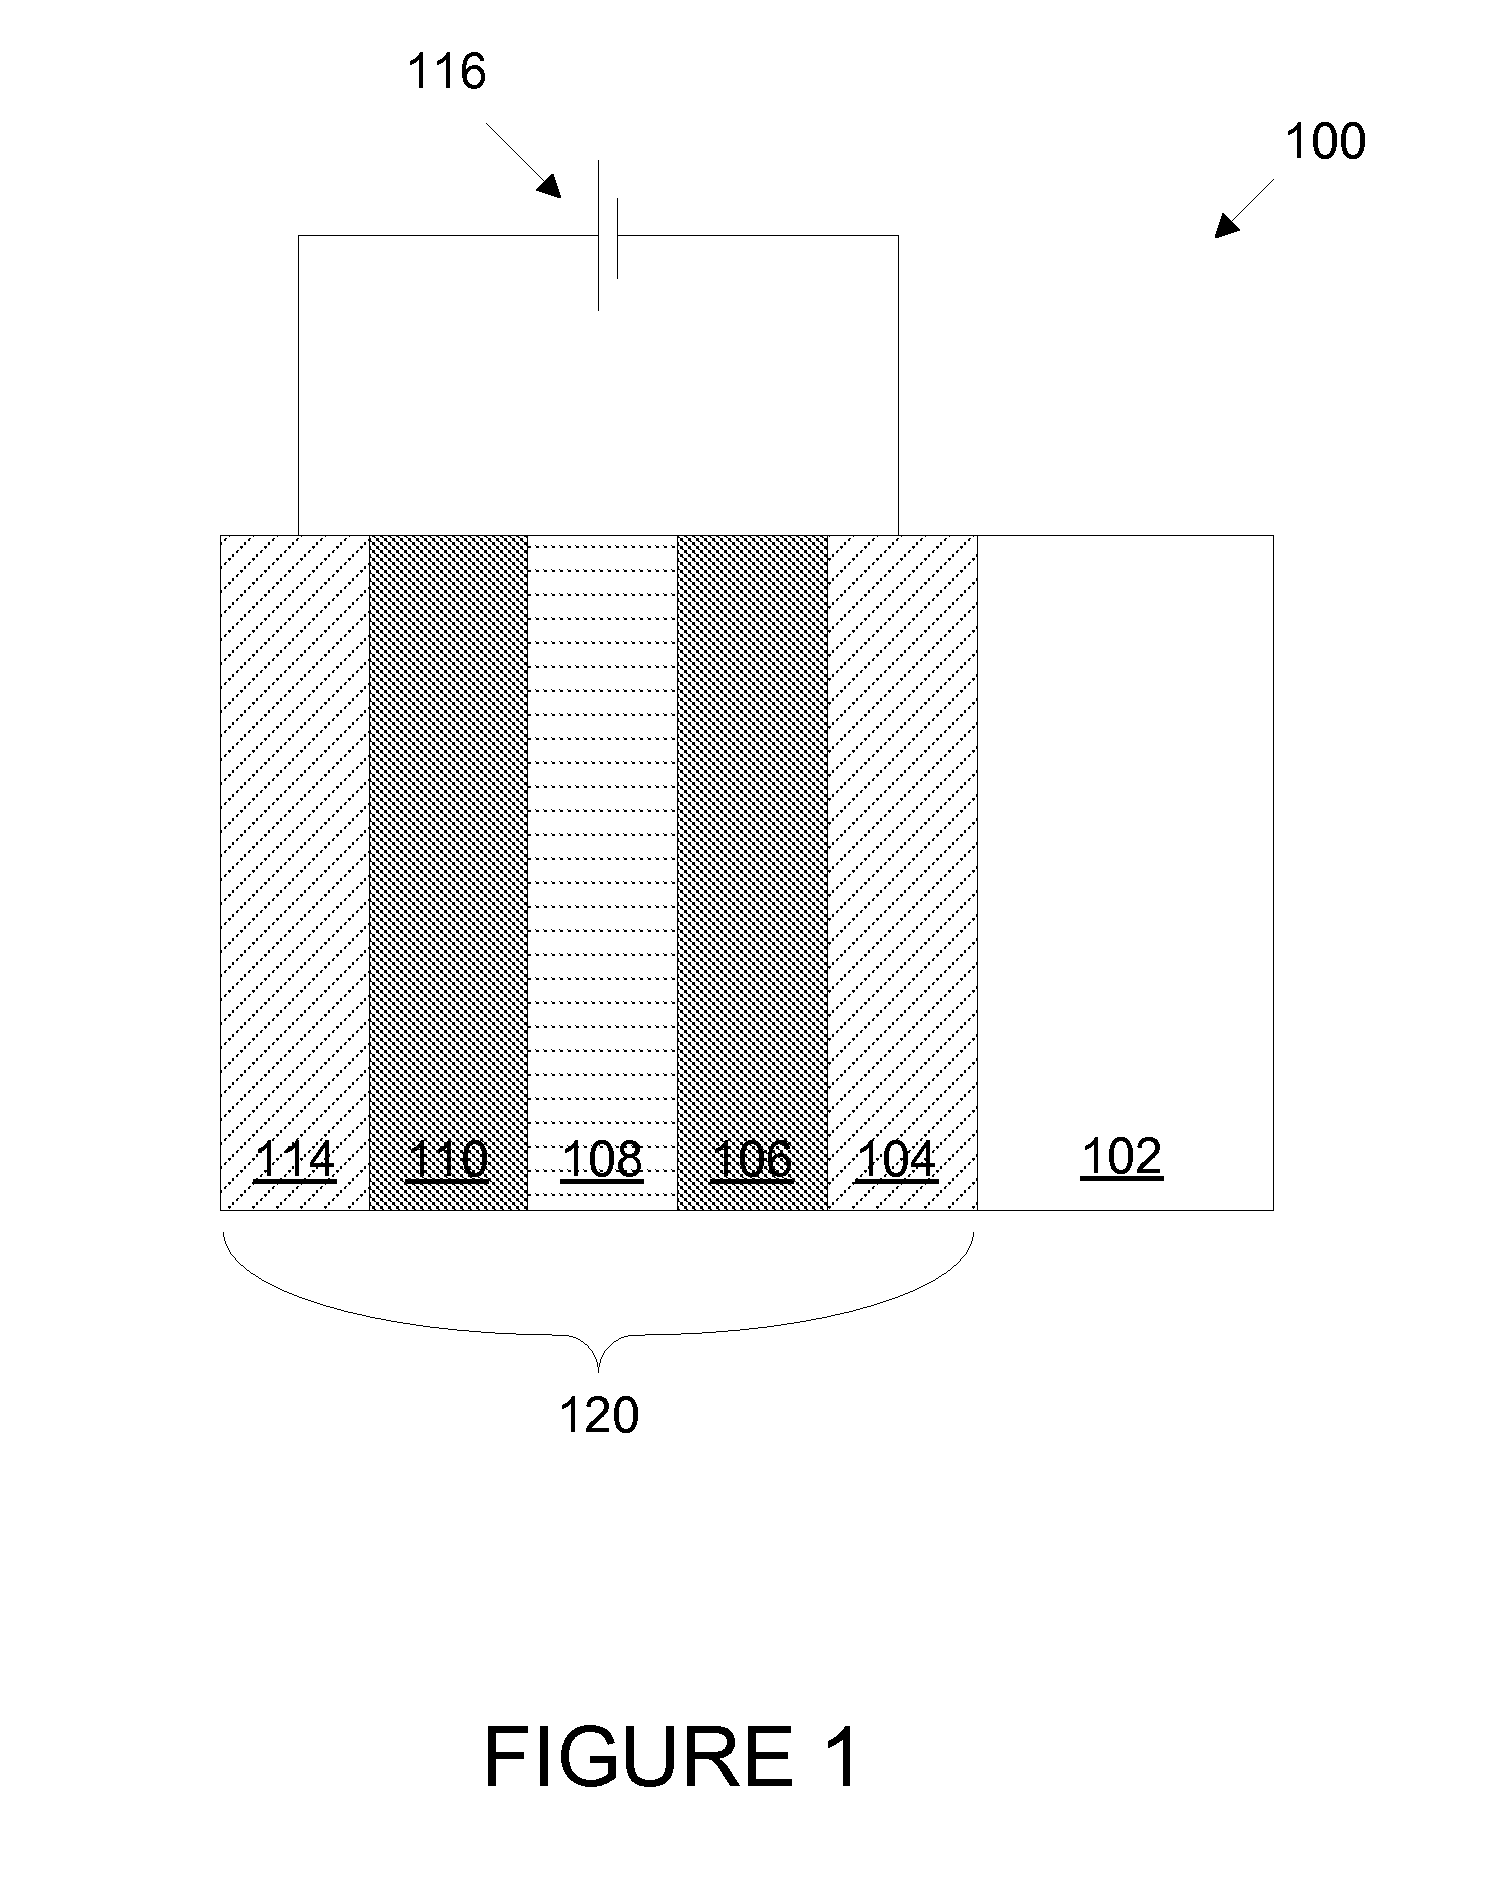 Fabrication of low defectivity electrochromic devices